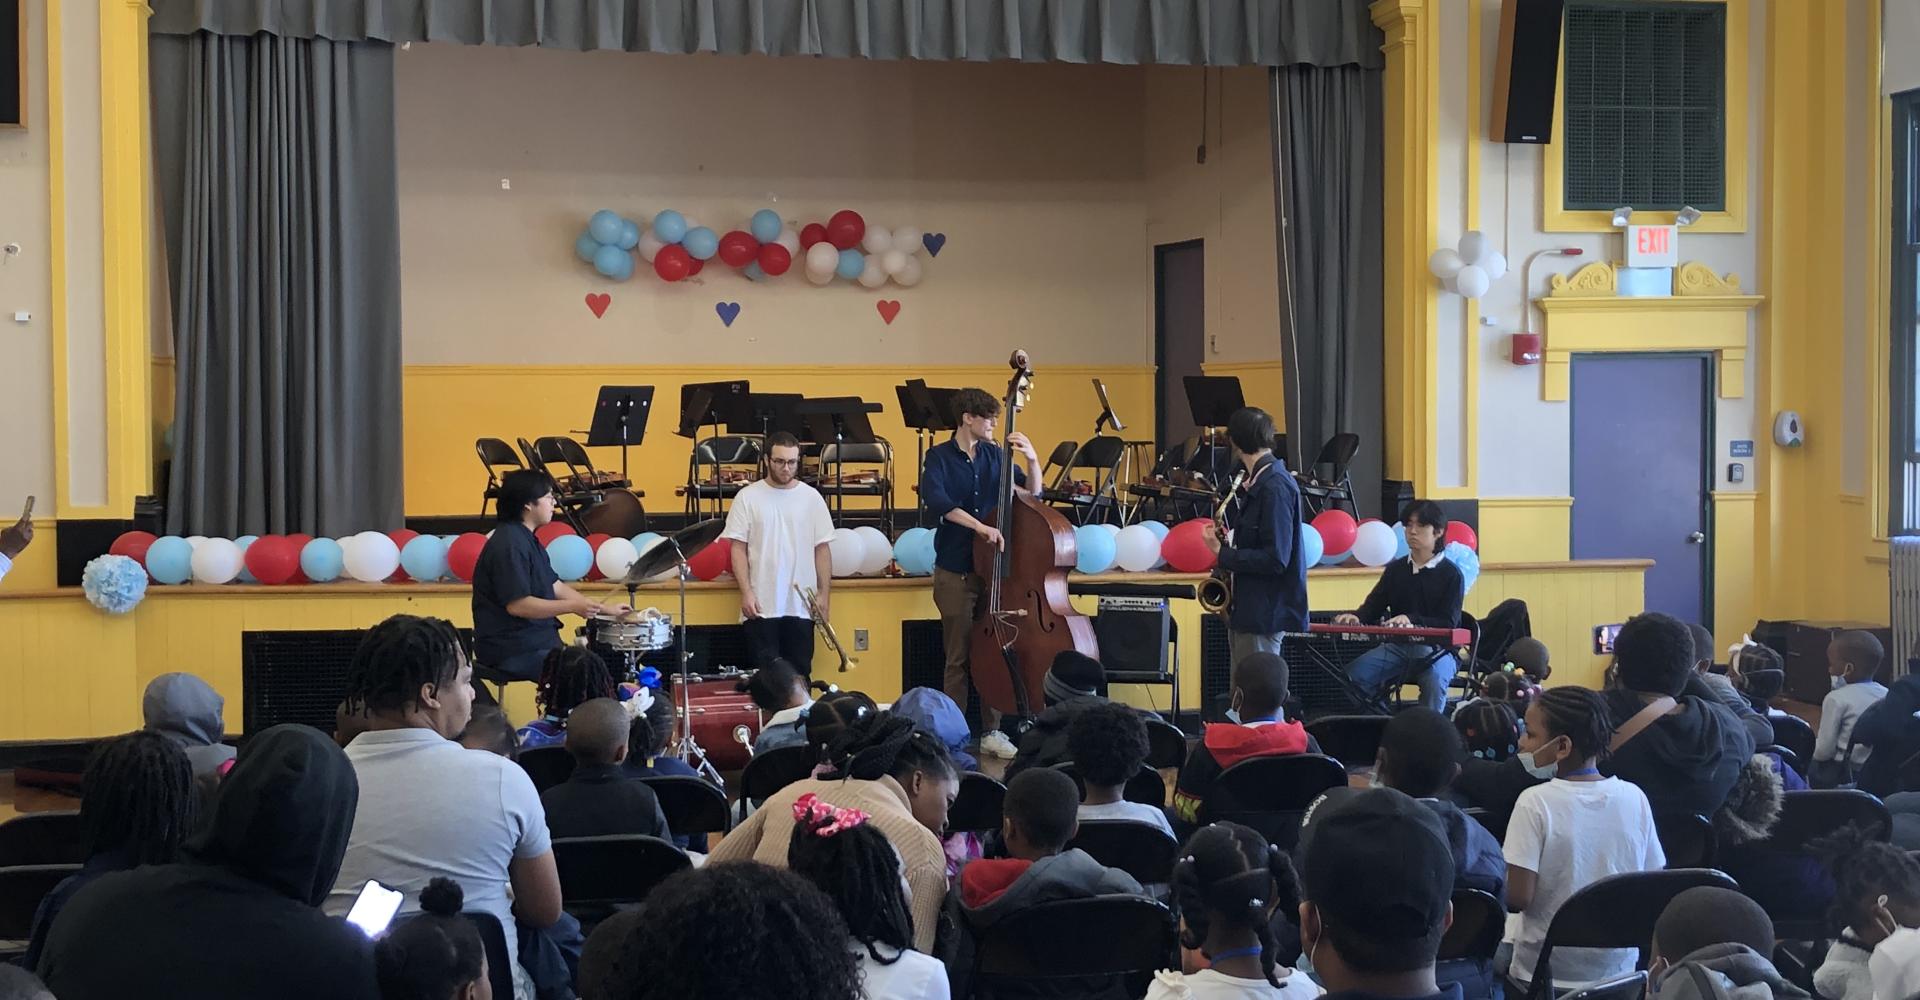 Jazz group playing at a school